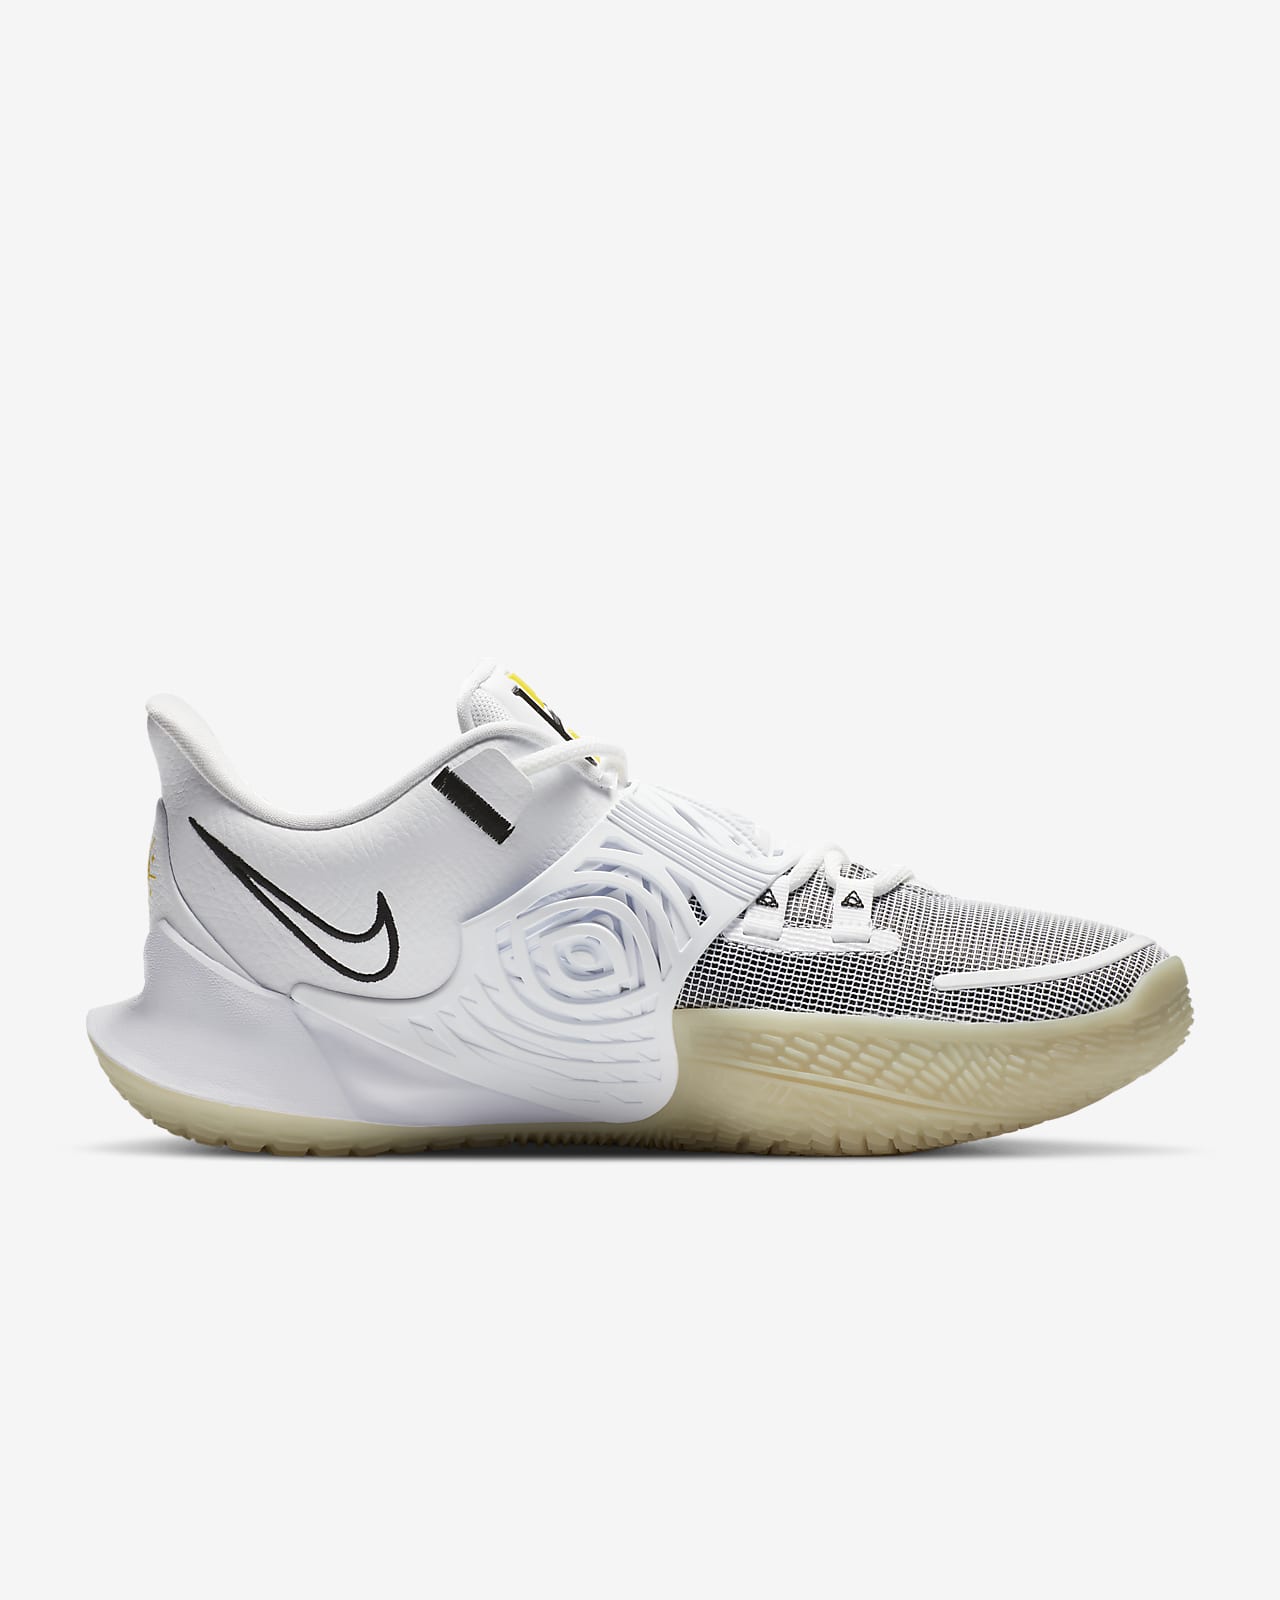 kyrie 3 shoes india